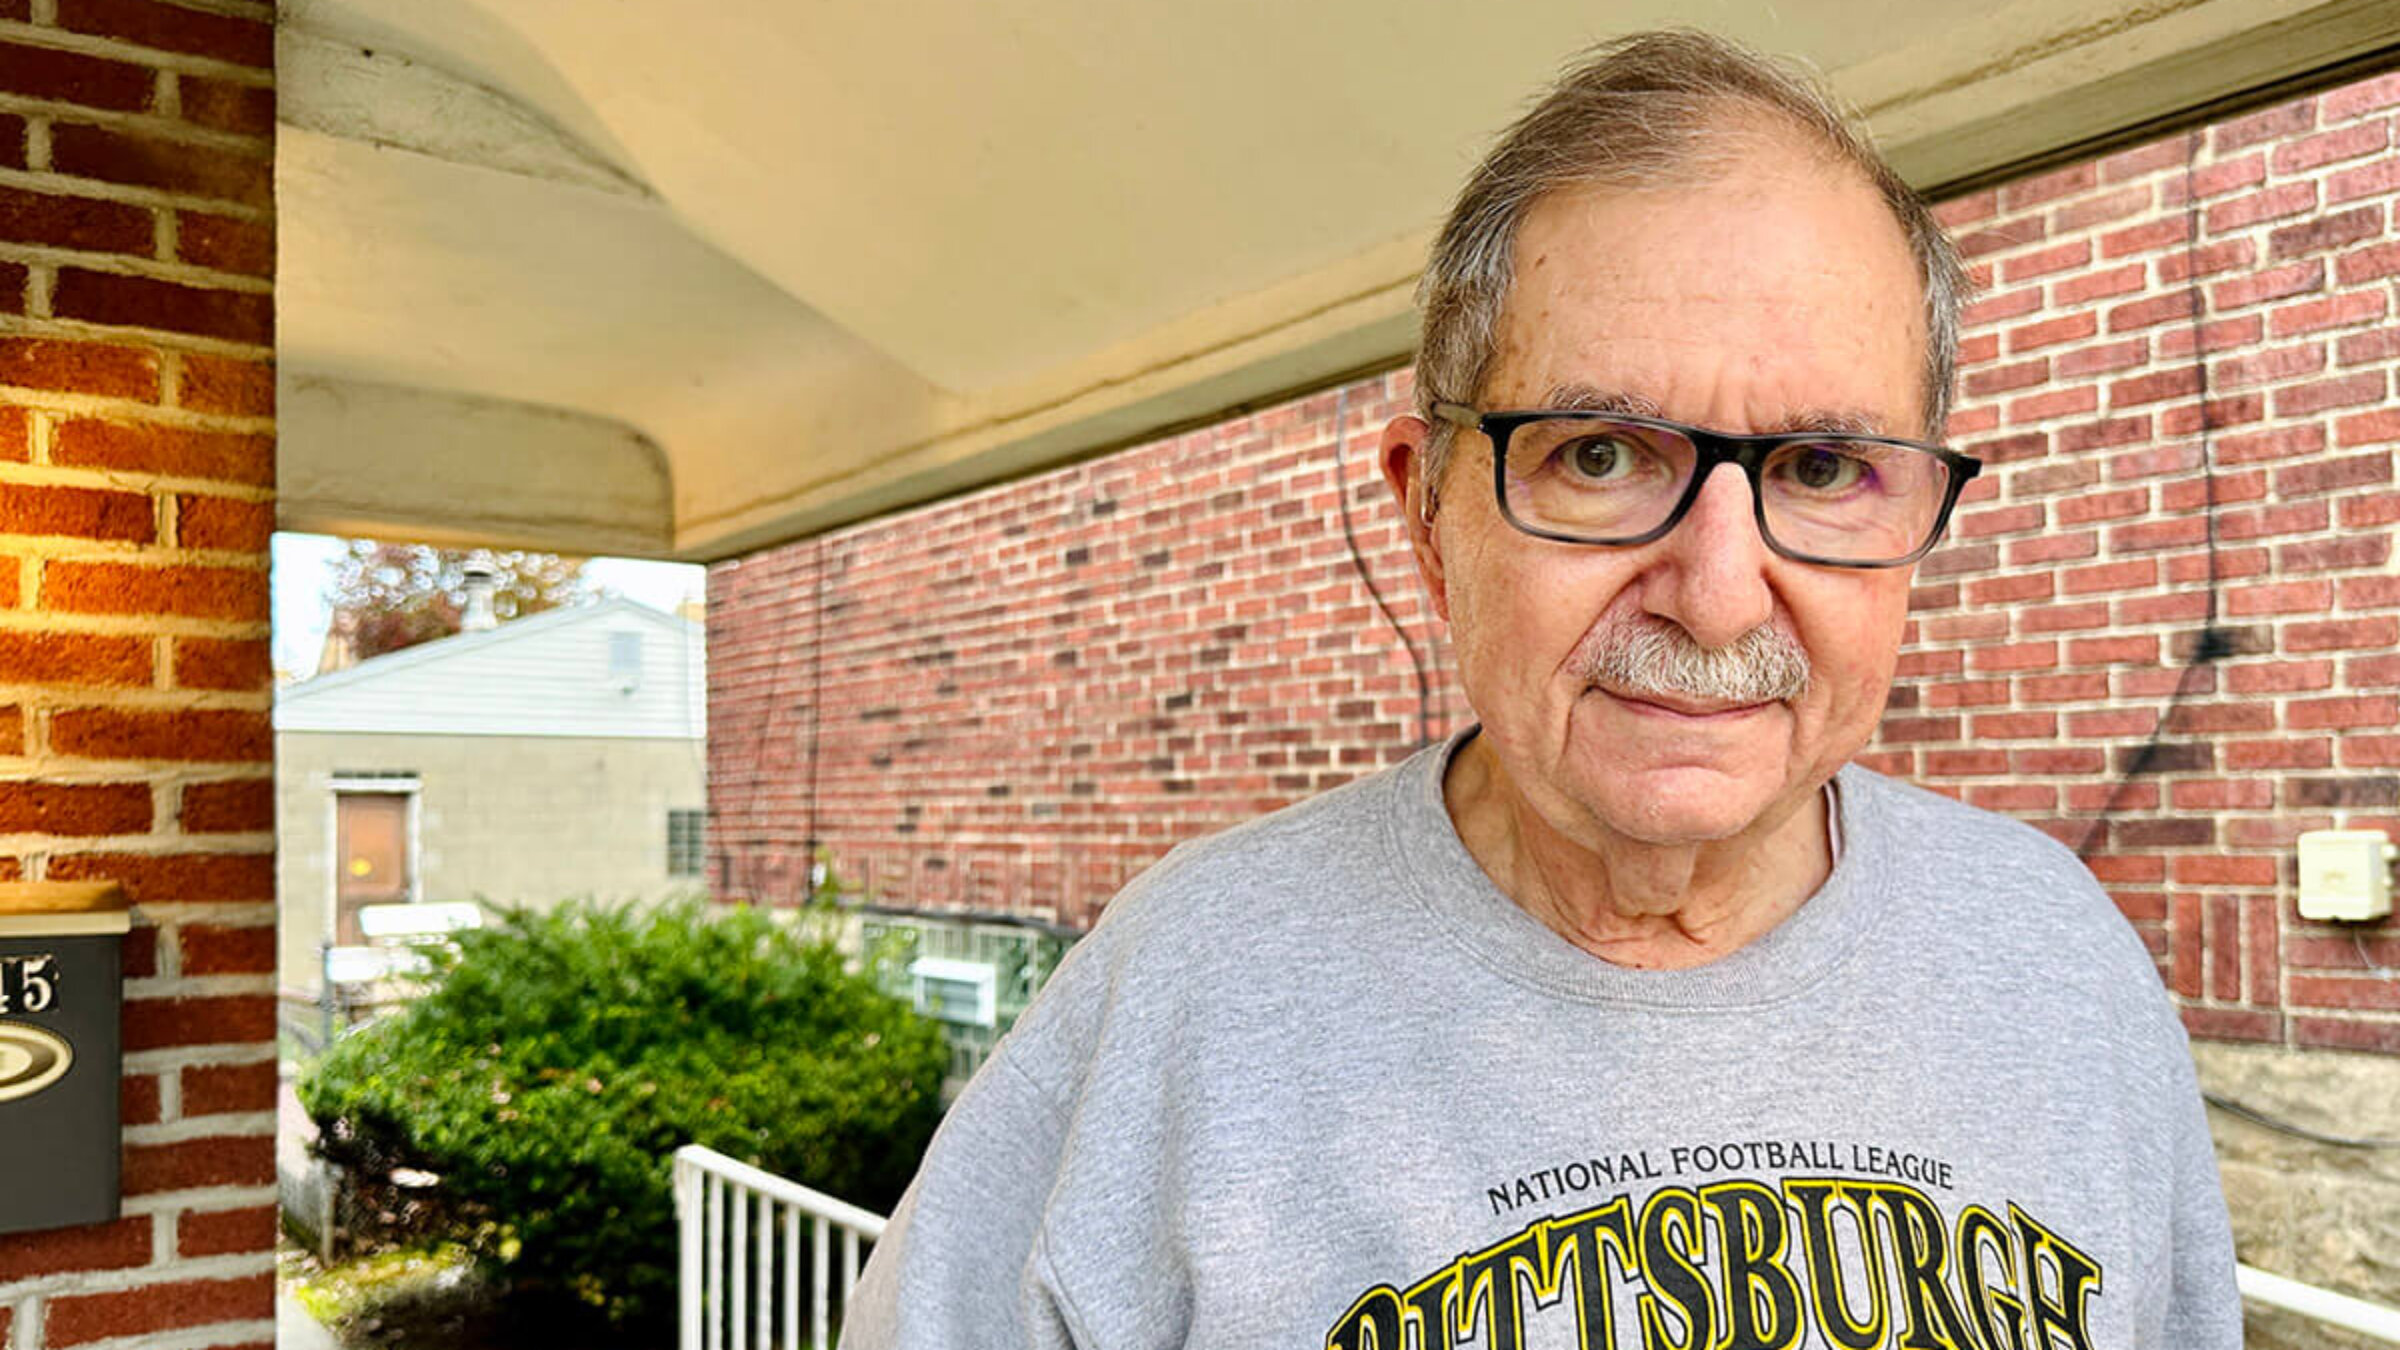 Barry Werber, a survivor of the Tree of Life massacre, on his porch at his home in Pittsburgh.